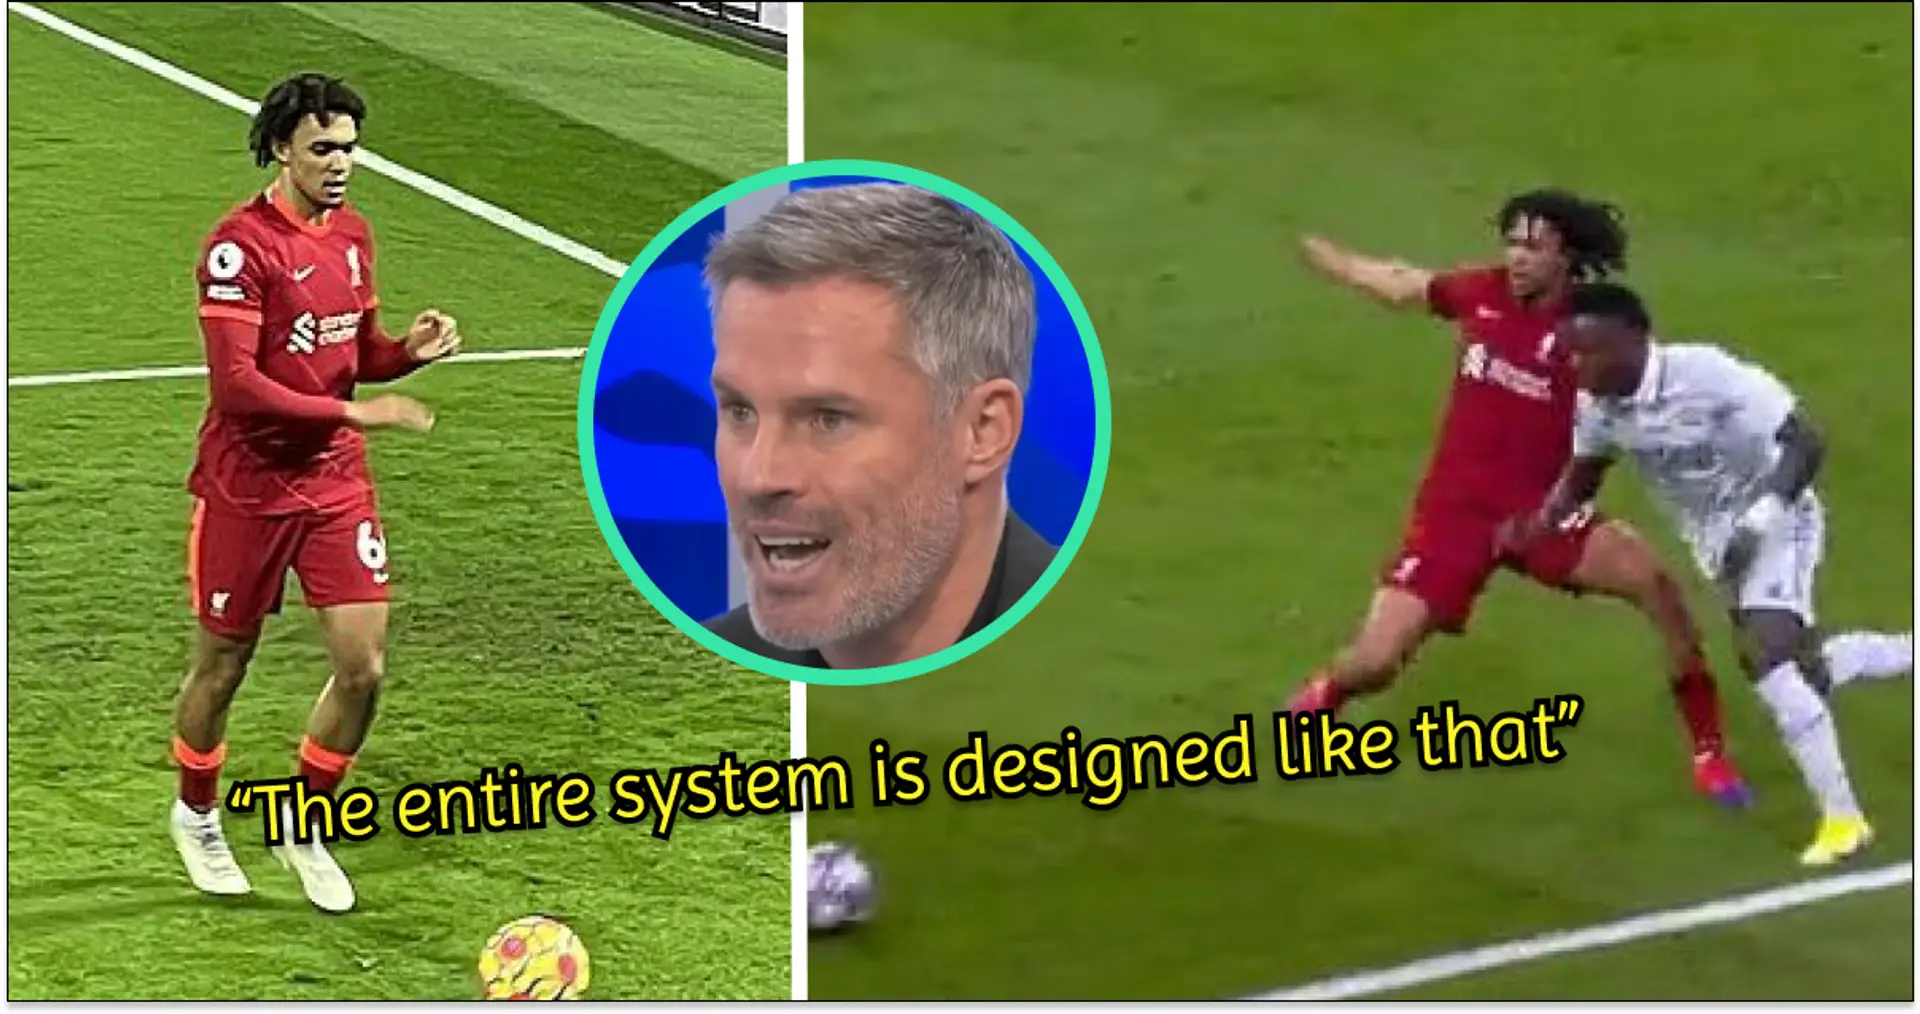 'We utilize fullbacks differently than when Carra played': fan explains why Trent-to-midfield calls wrong